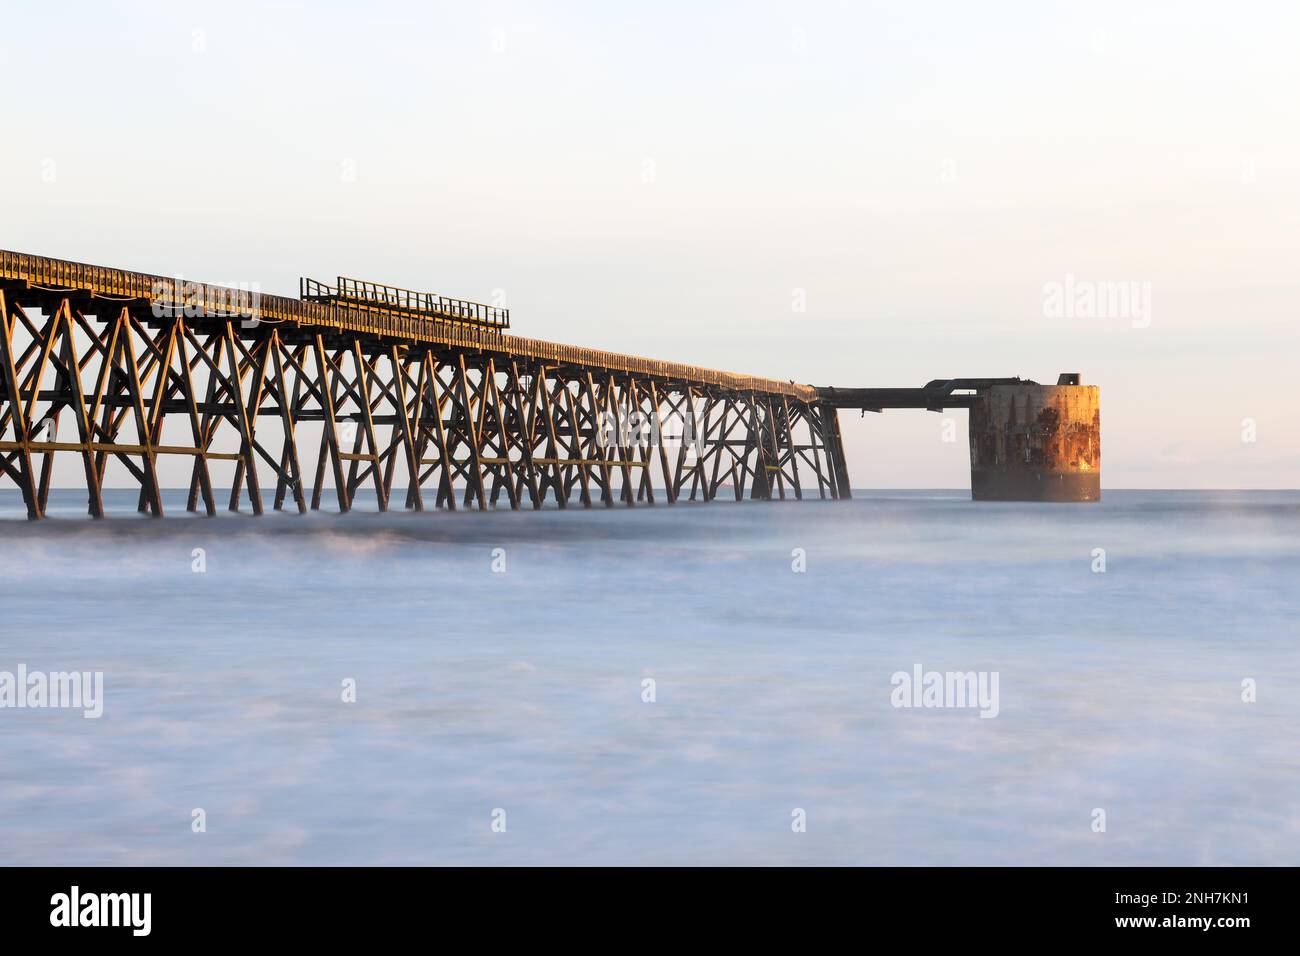 Steetley Pier, Hartlepool, County Durham, UK. The Pier was used to pump water to the Magnesite plant in the 1960’s which has since been demolished. Stock Photo